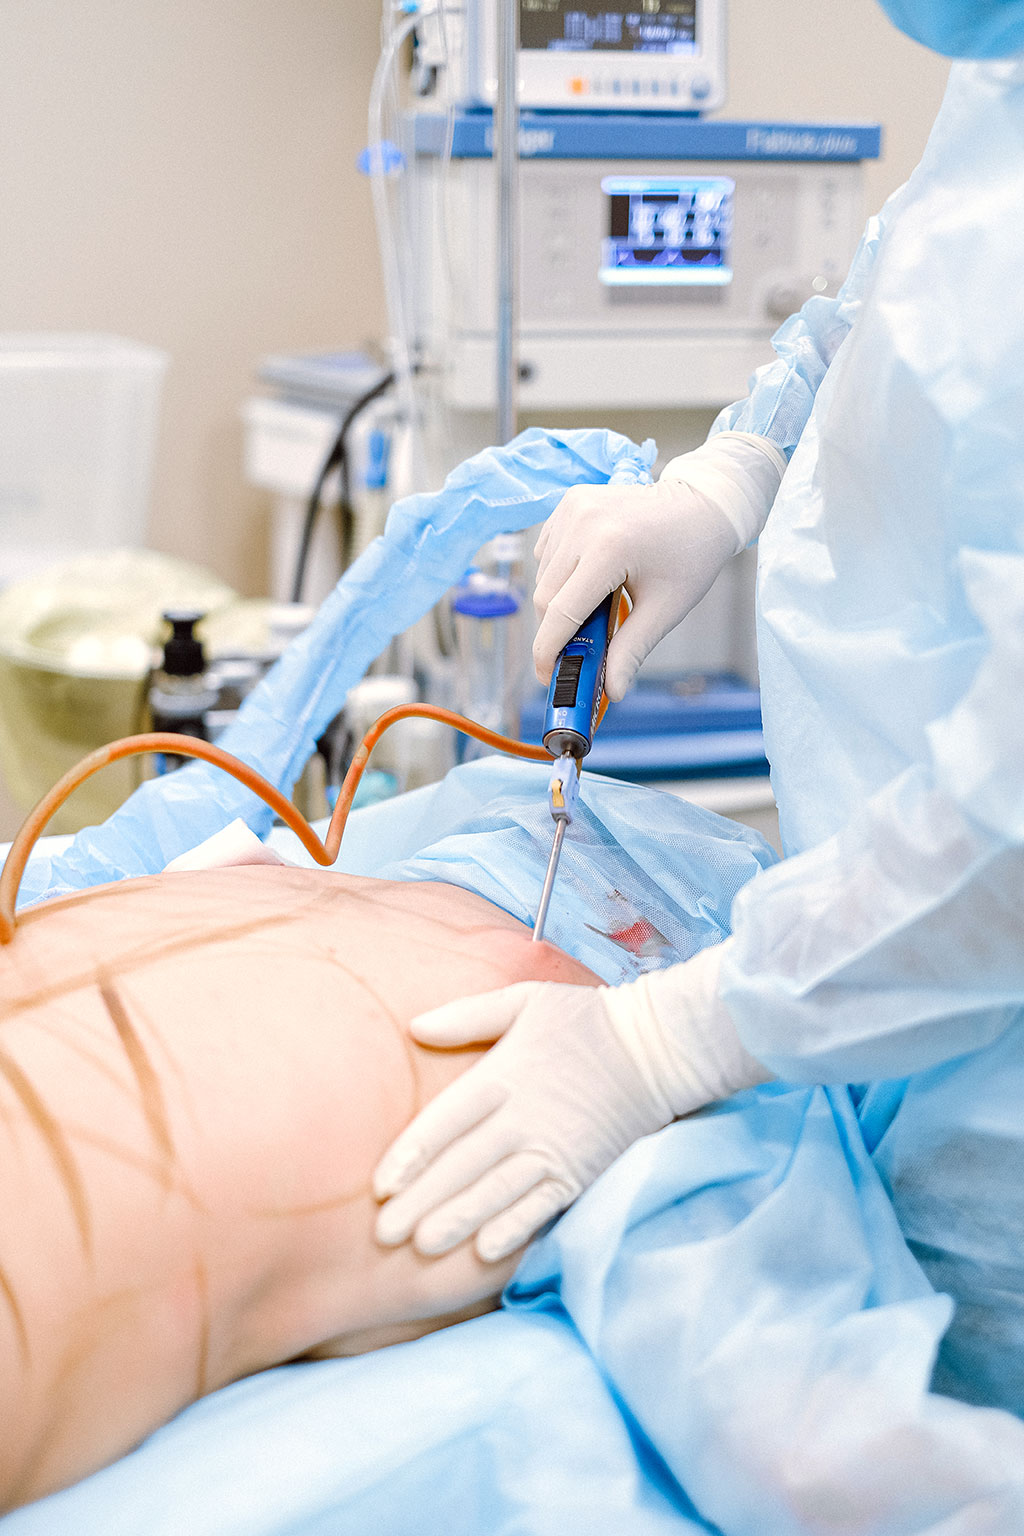 Image: The global electrosurgical devices market is anticipated to surpass USD 10 billion by 2029 (Photo courtesy of Pexels)